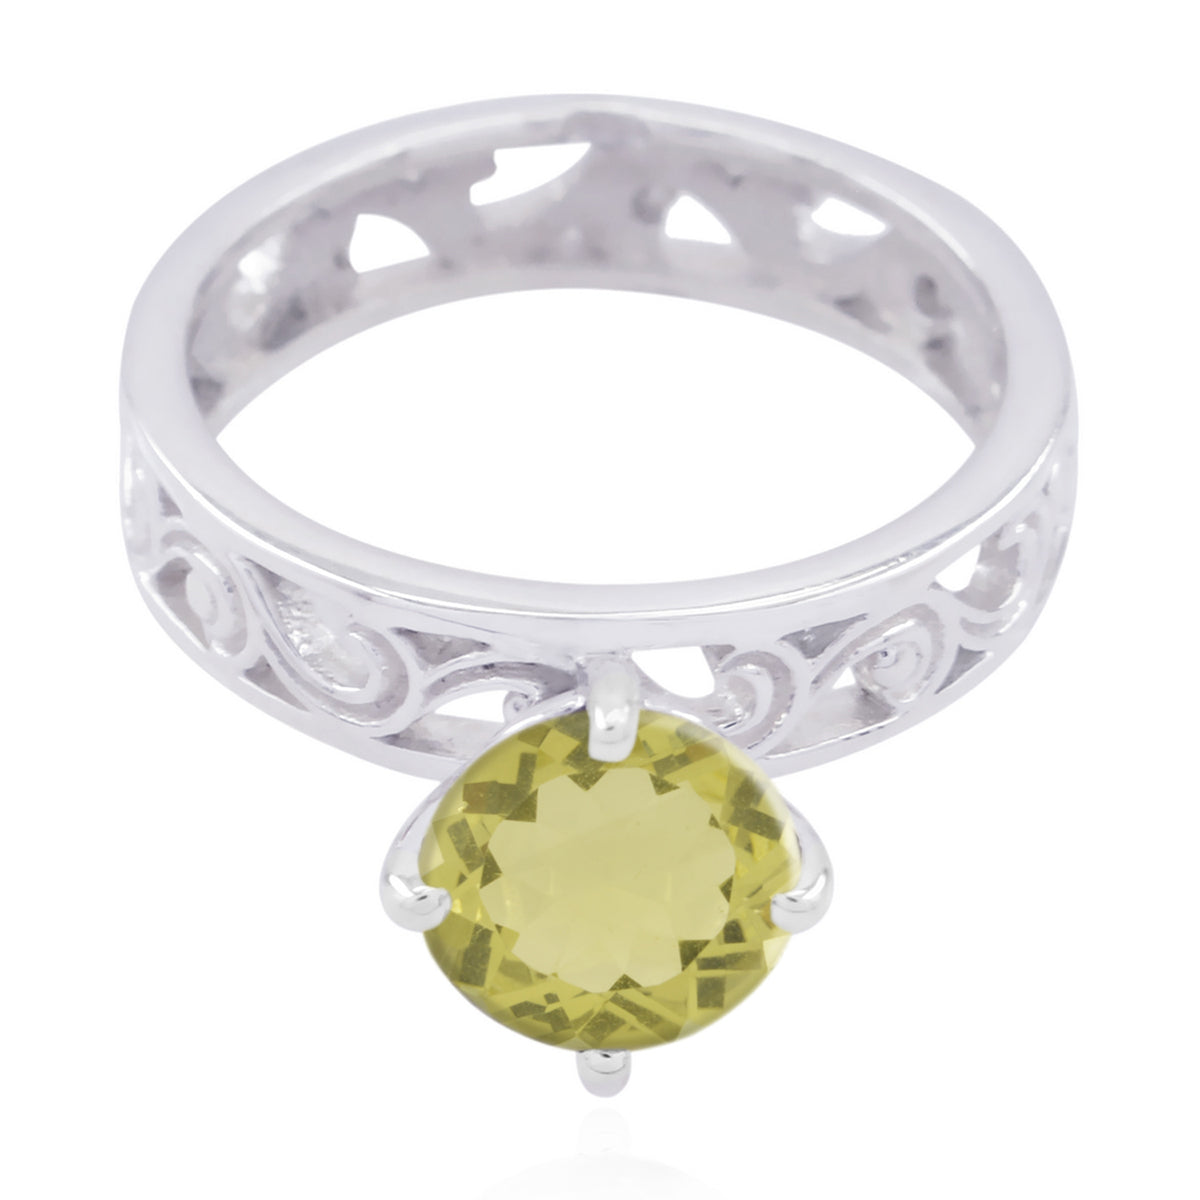 Well-Formed Stone Lemon Quartz 925 Silver Rings Top Jewelry Stores